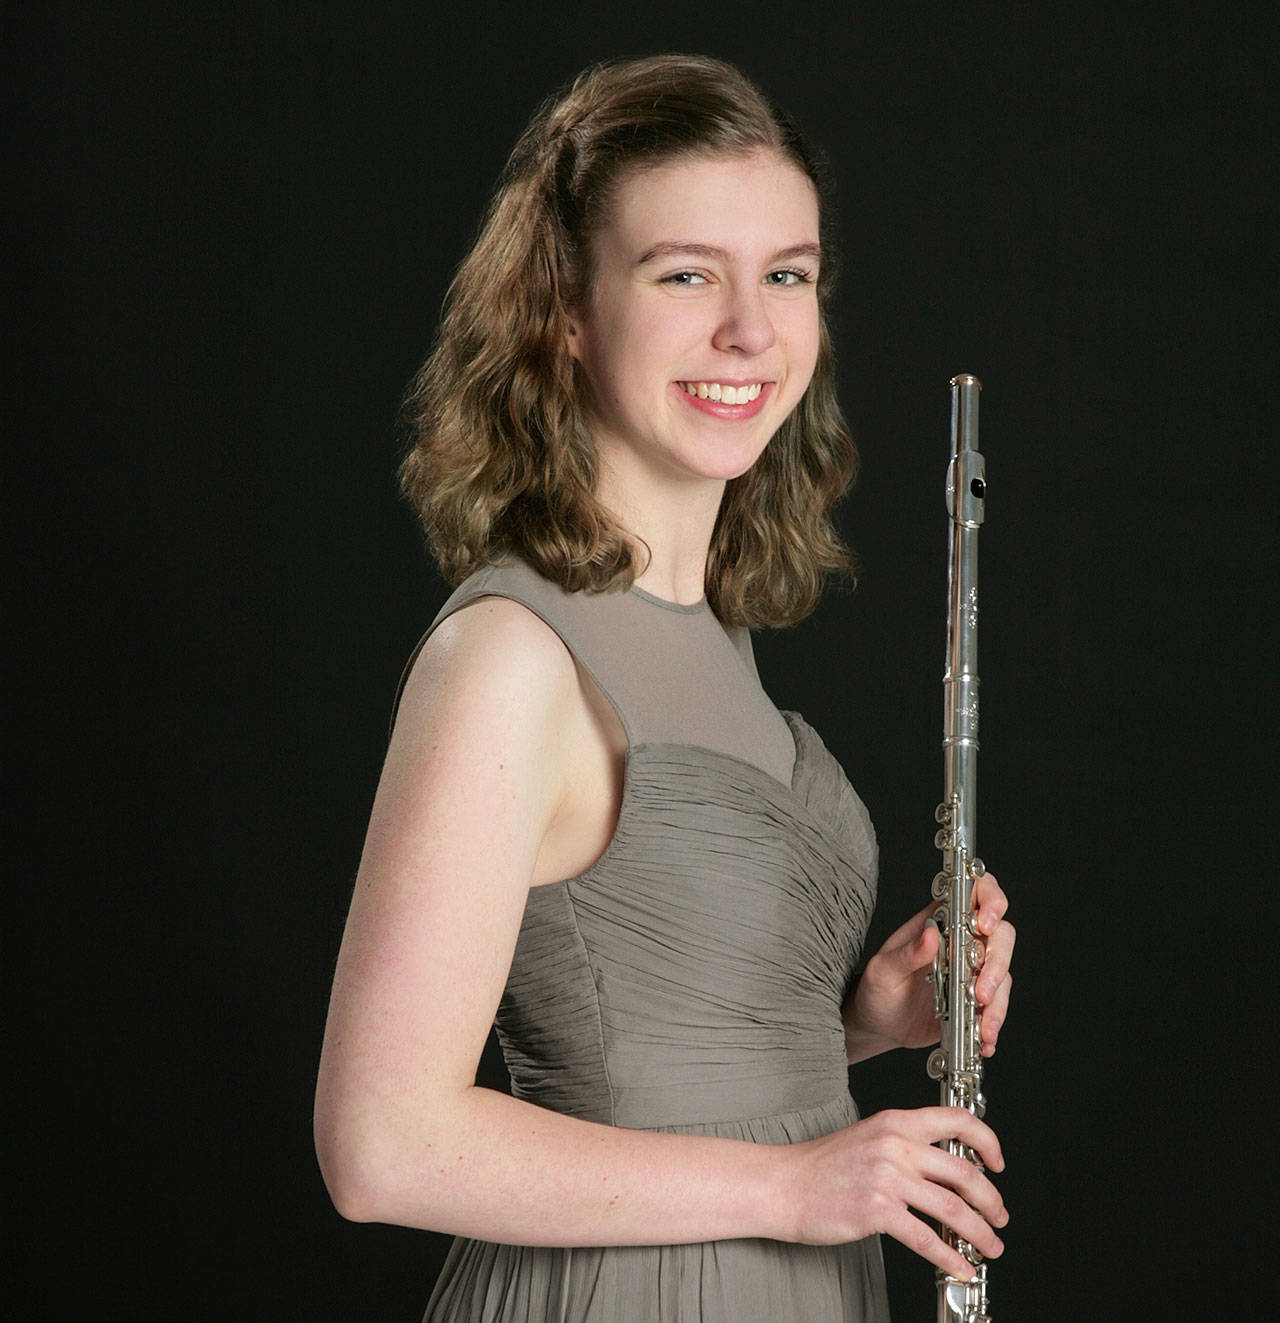 Photo courtesy of Bainbridge Symphony Orchestra | Phoebe Rawn claimed the top spot for her performance of “Flute Fantaisie” by Hüe in the 2018 Bainbridge Symphony Ochestra’s Young Artist Concerto Competition.